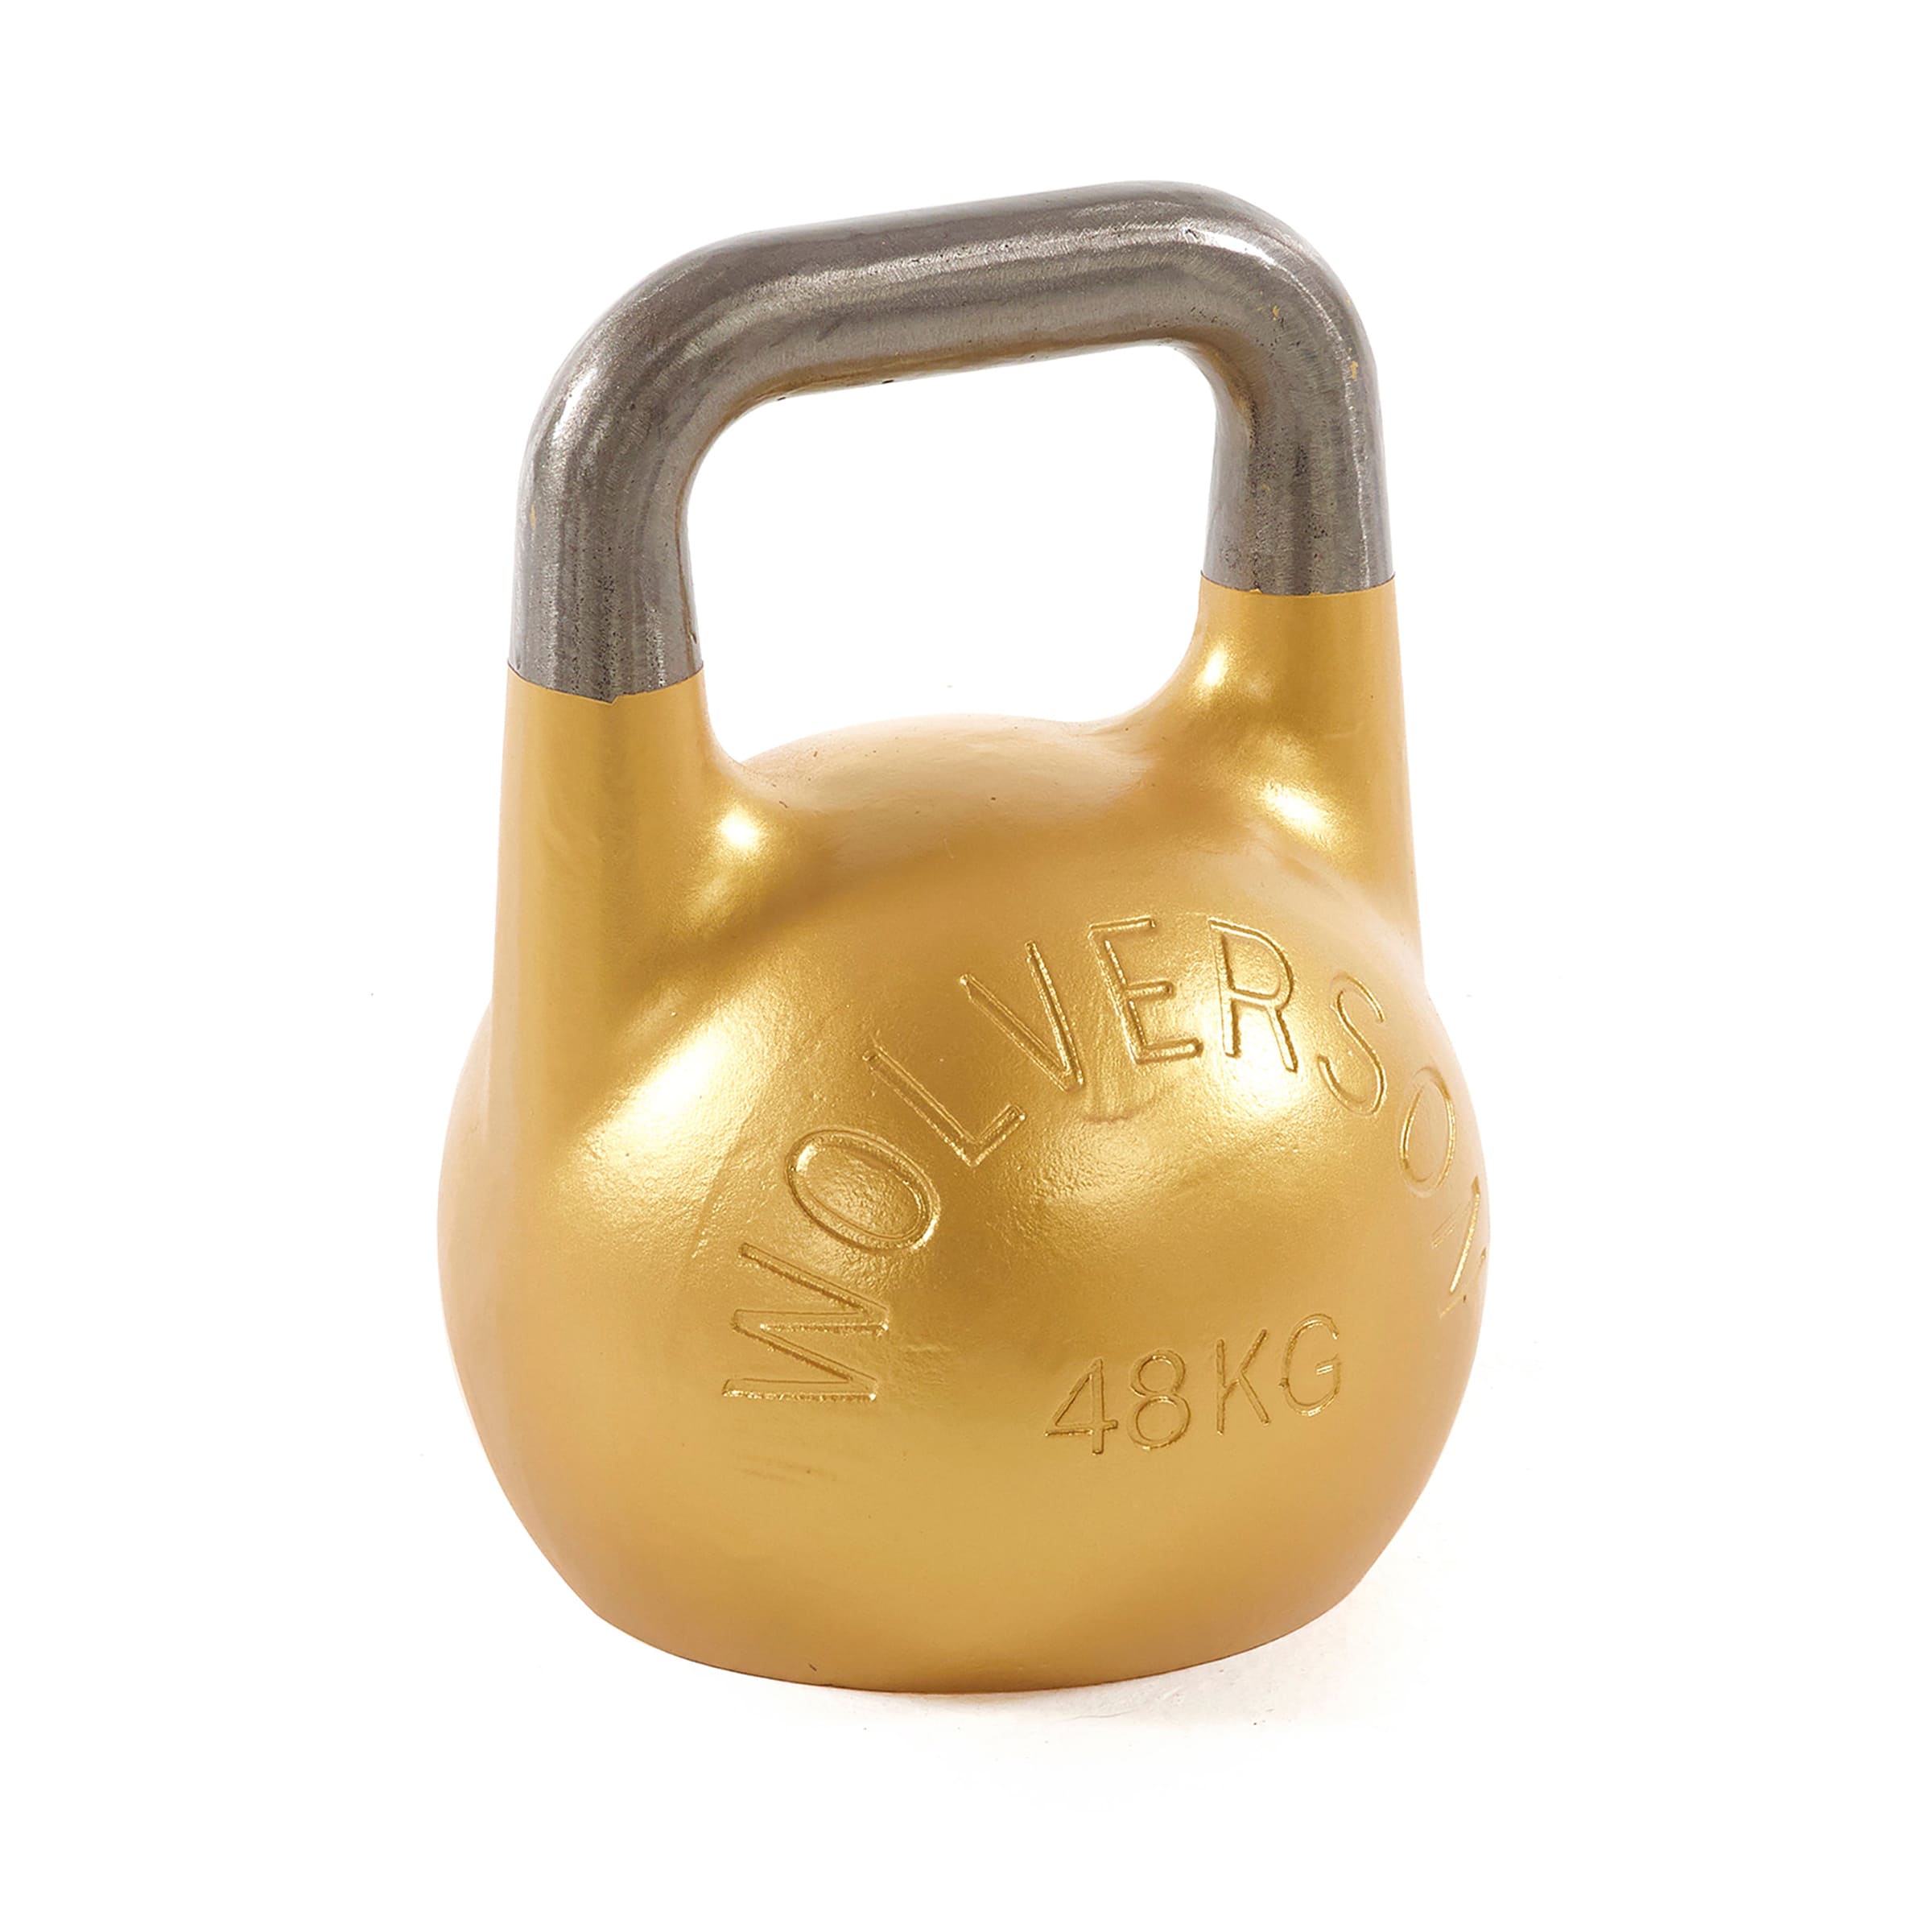 Wolverson Heavy Competition Kettlebells